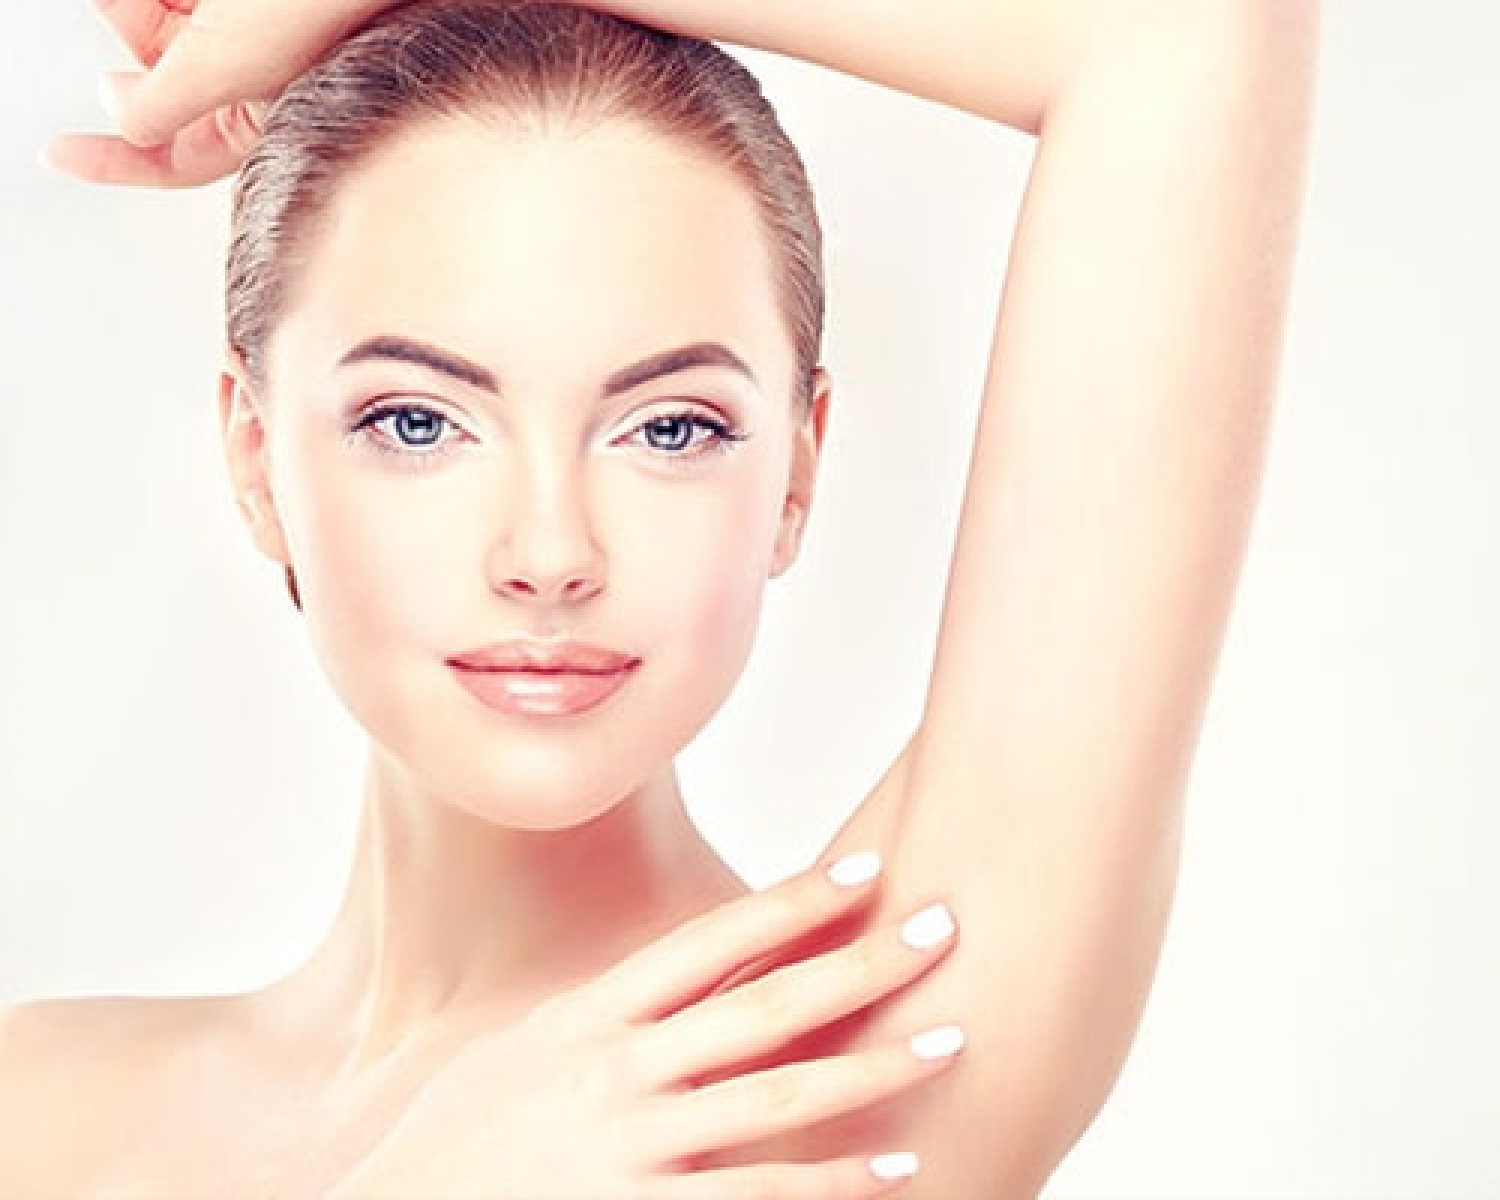 Underarm Laser Hair Removal at Rs.99 Only Infographic